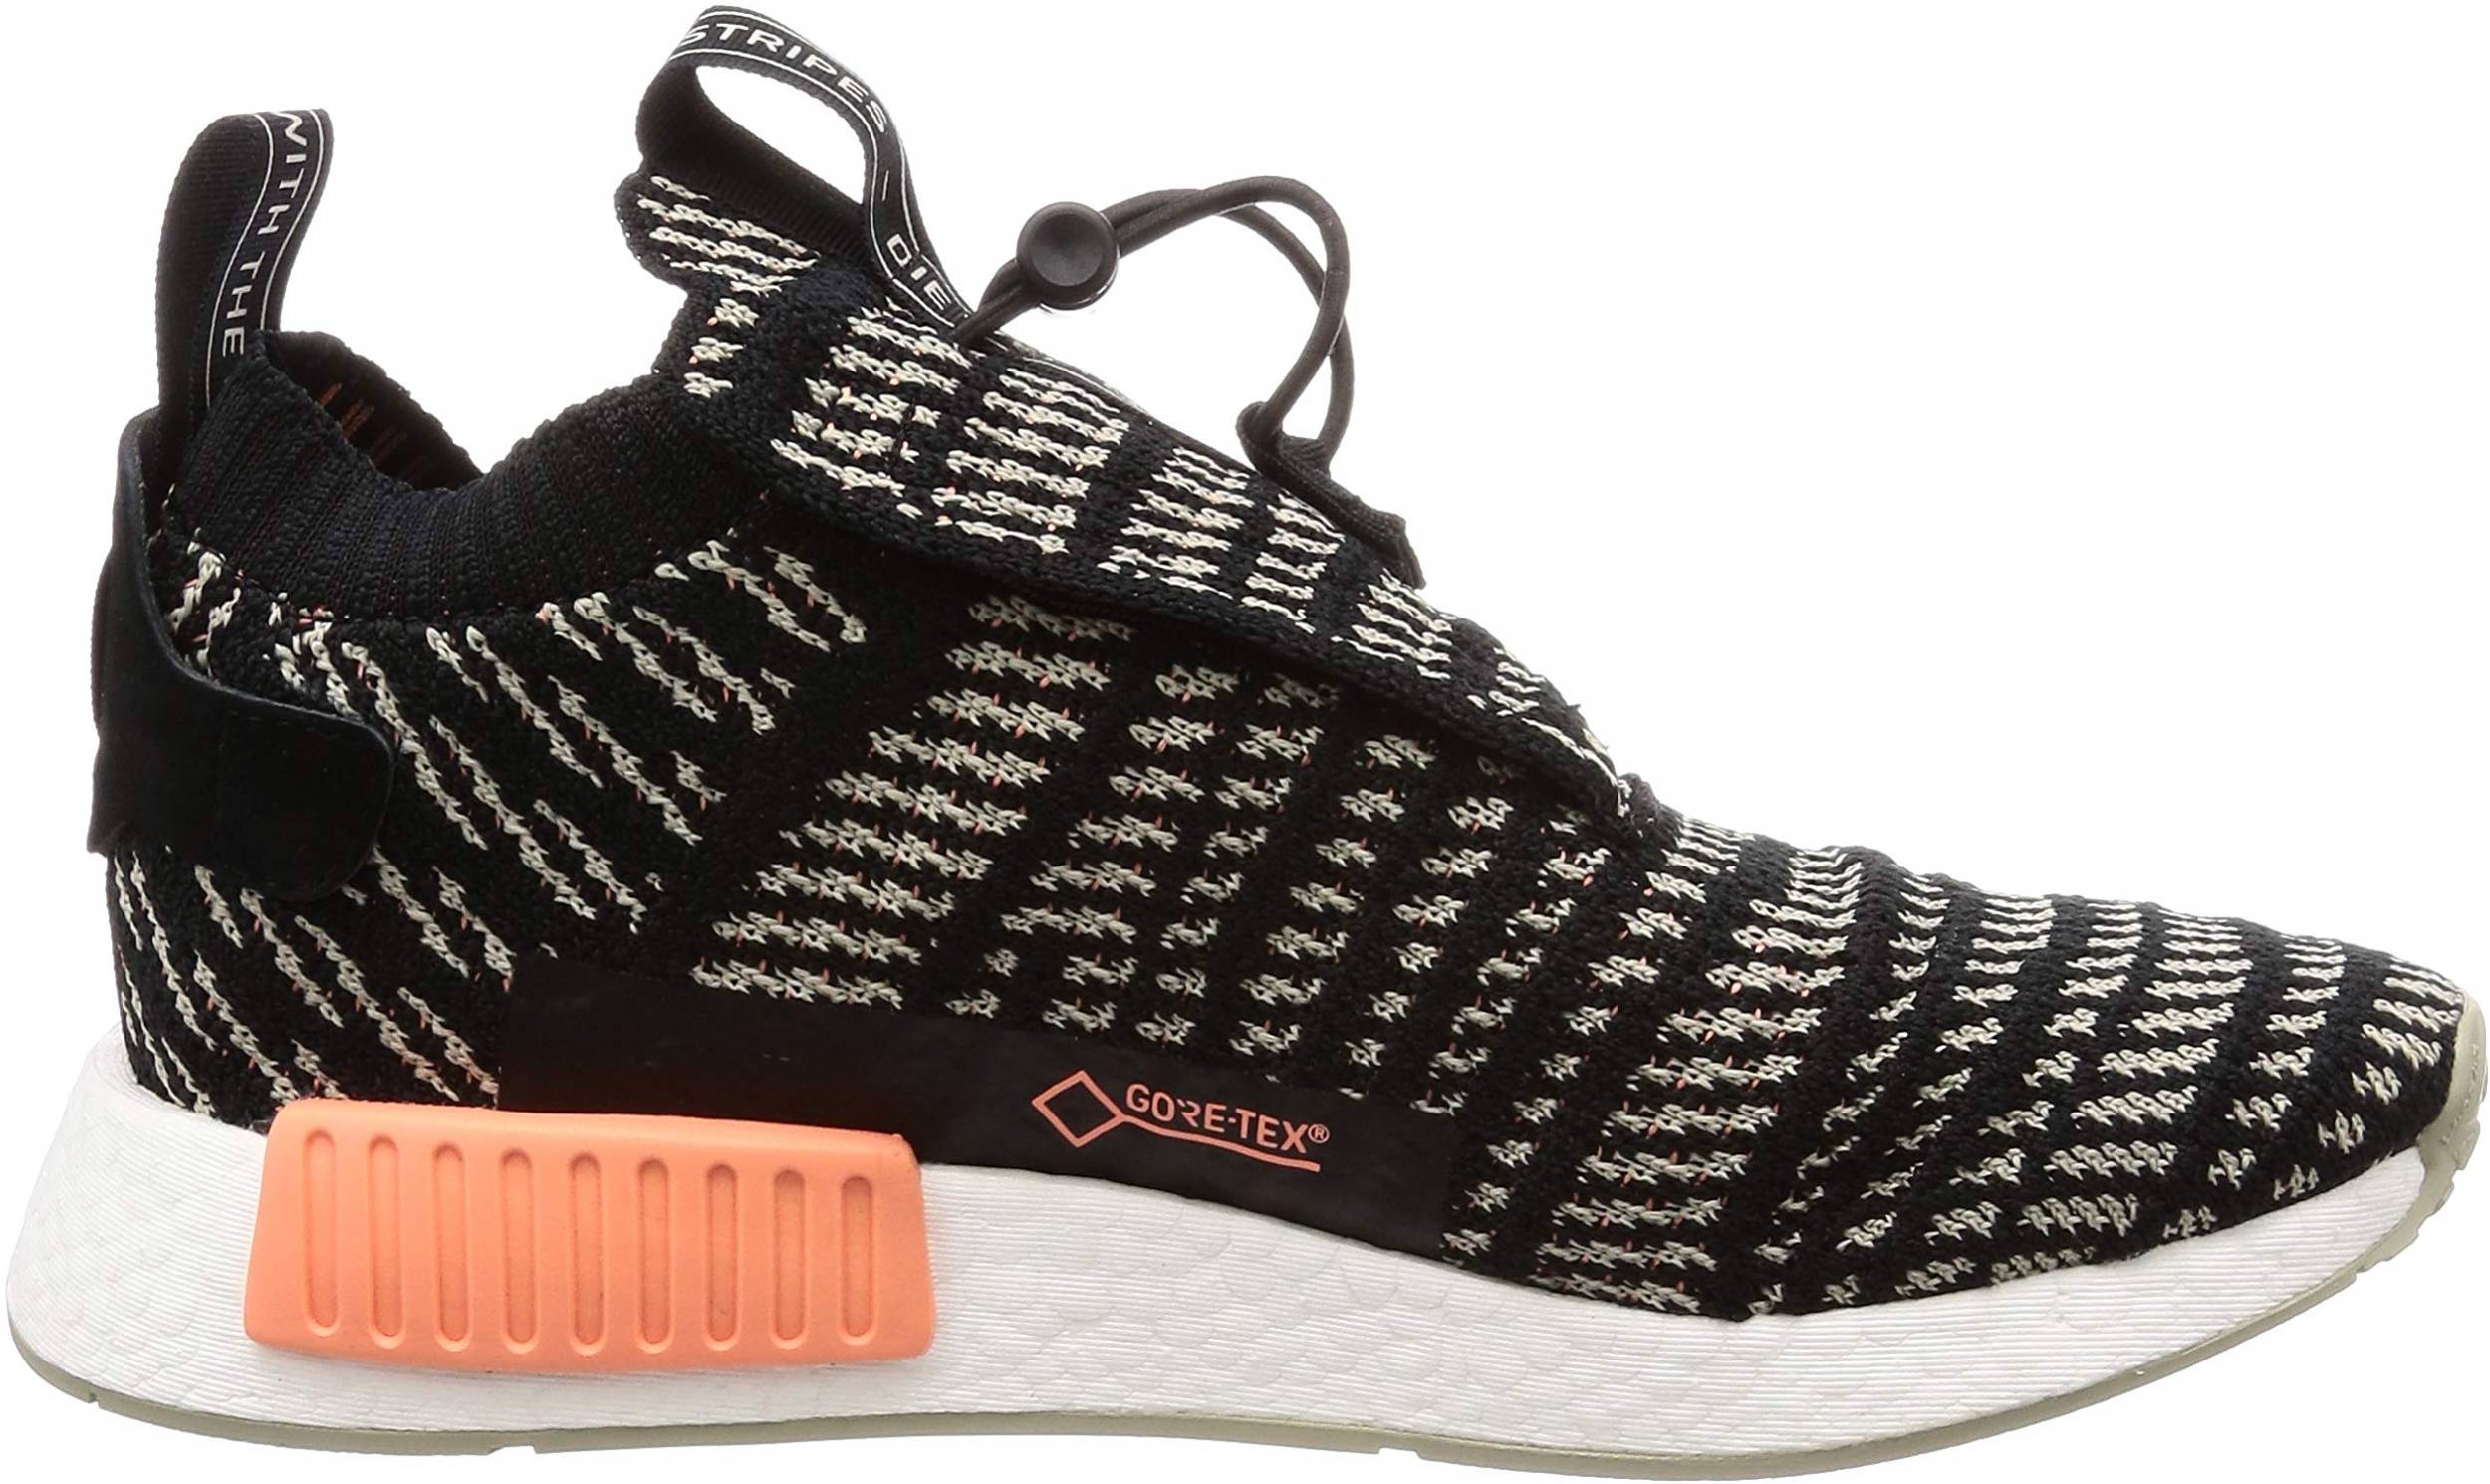 adidas gore tex shoes nmd